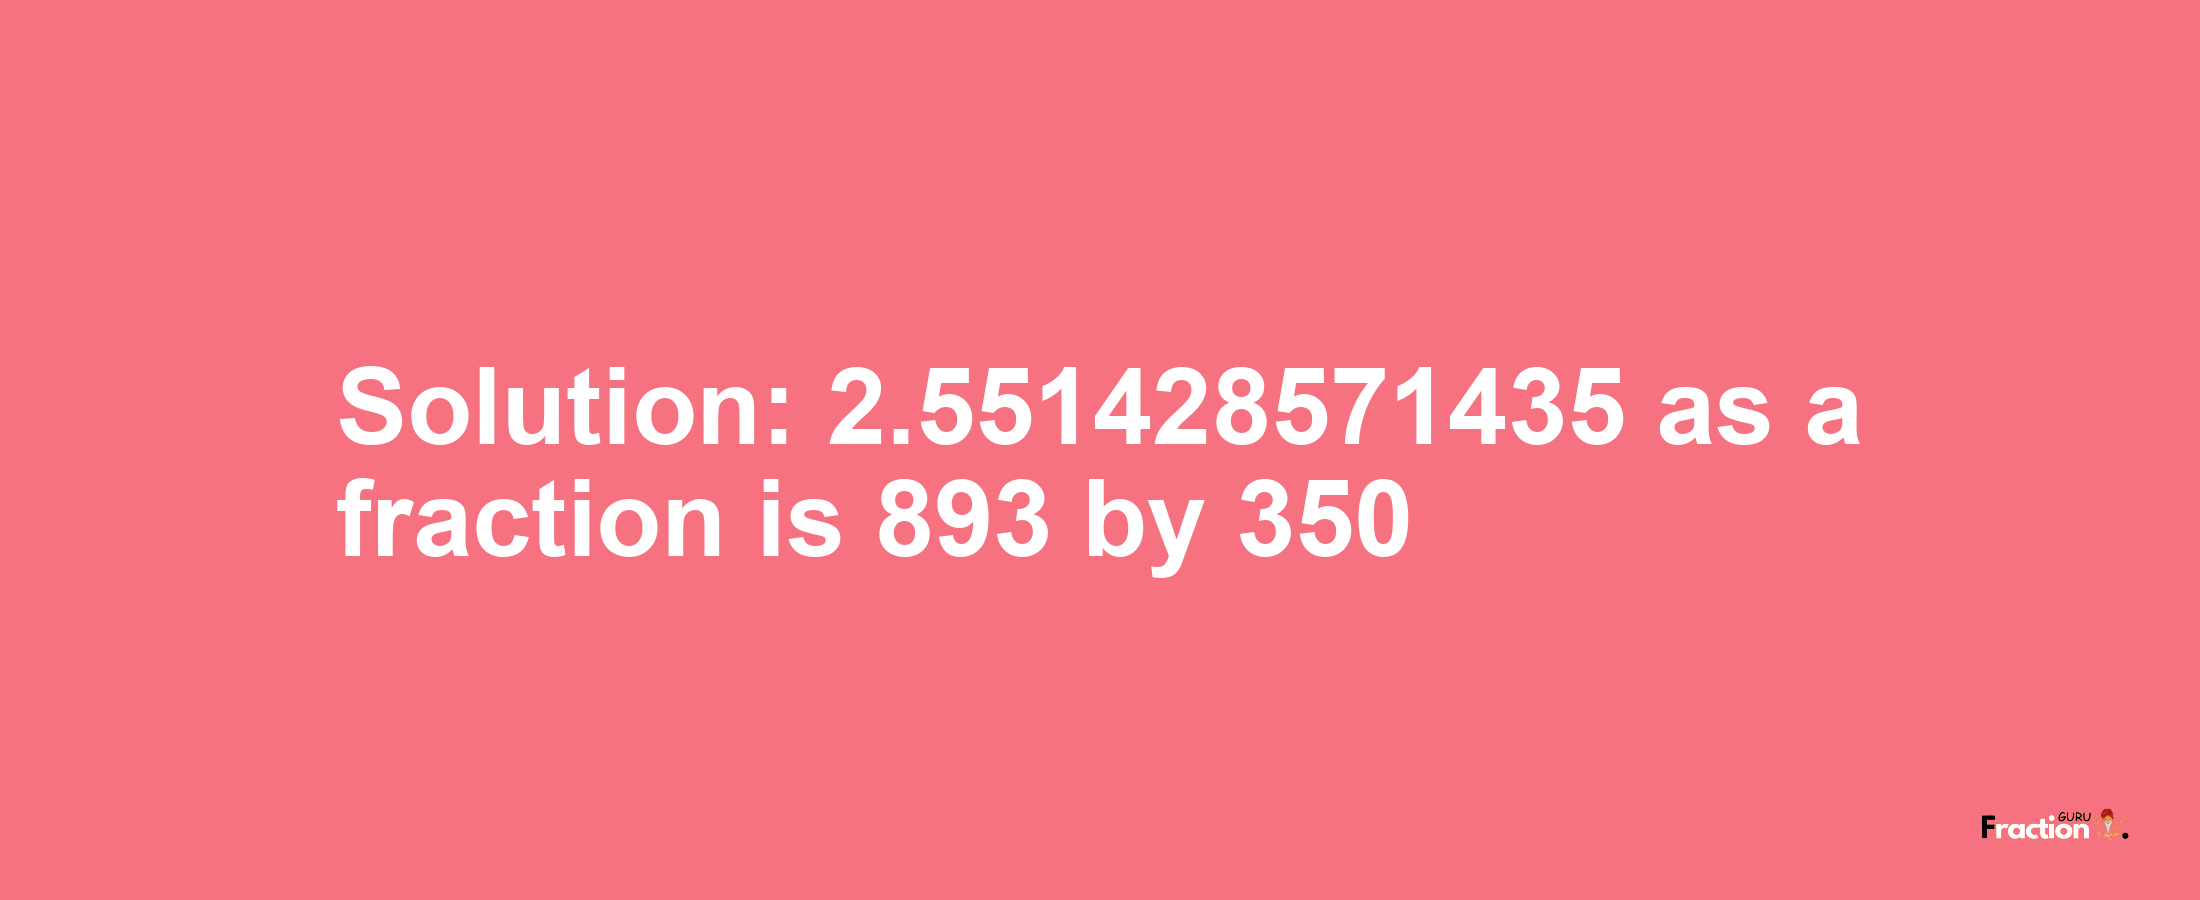 Solution:2.551428571435 as a fraction is 893/350